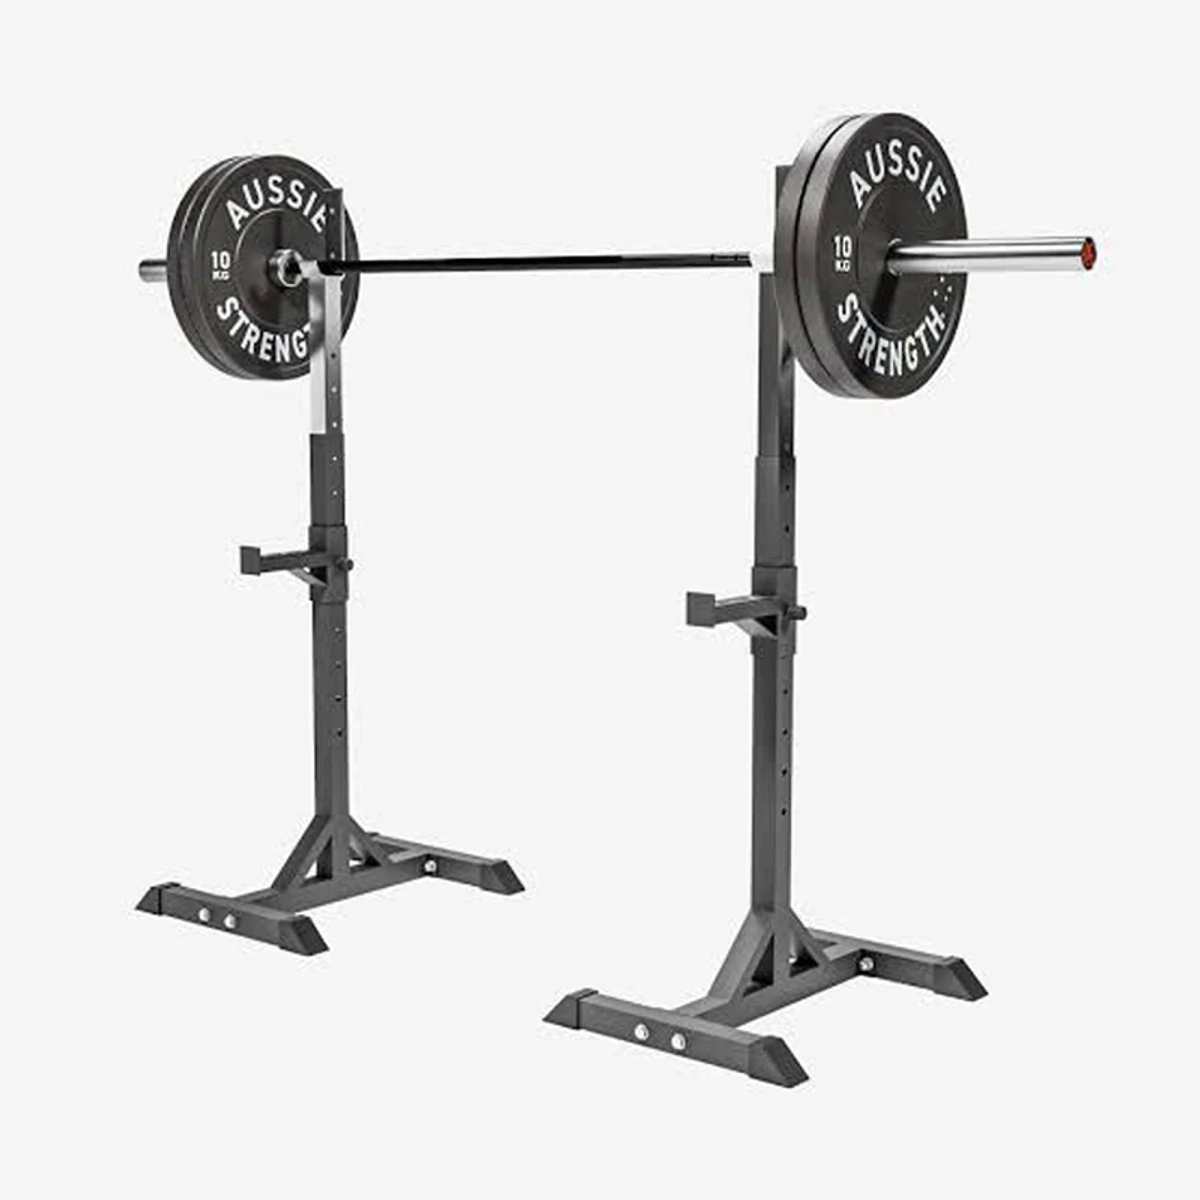 GYM MASTER Adjustable Weight Lifting Squat Rack Stands with Spotters-1 Set